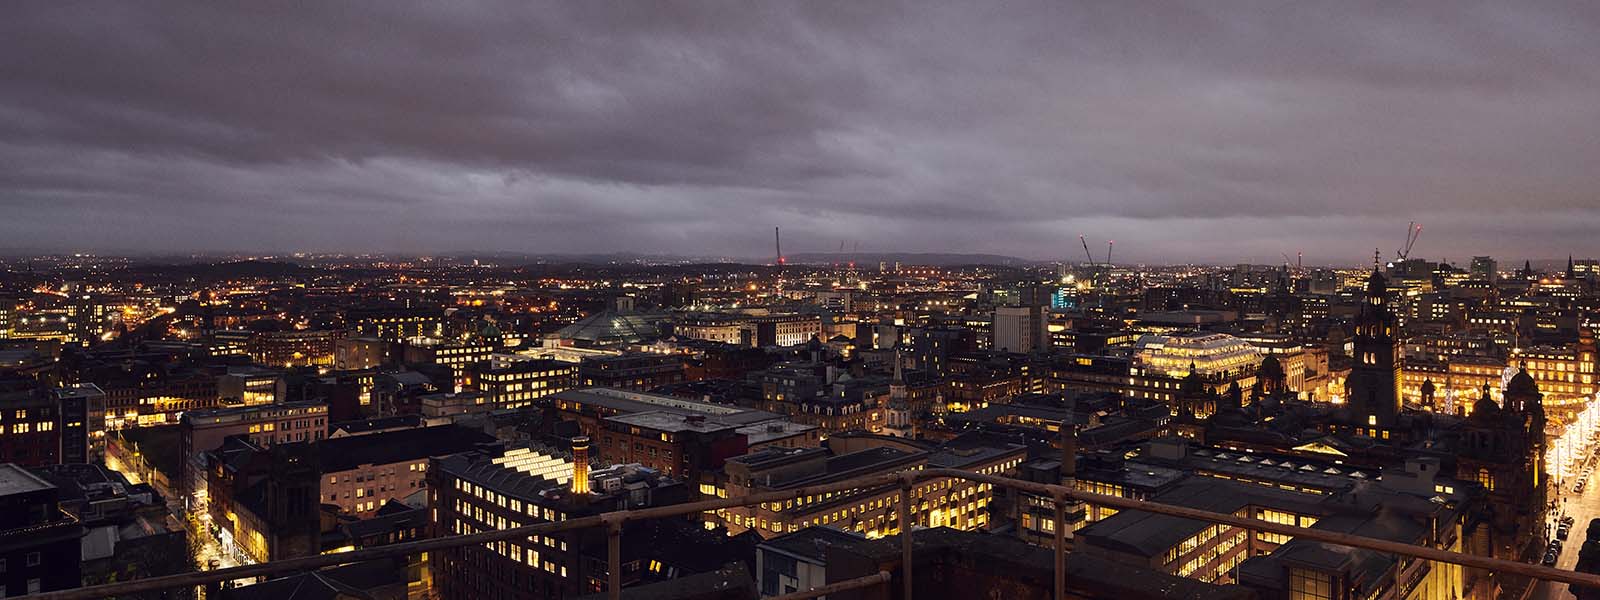 Cityscape of Glasgow at night